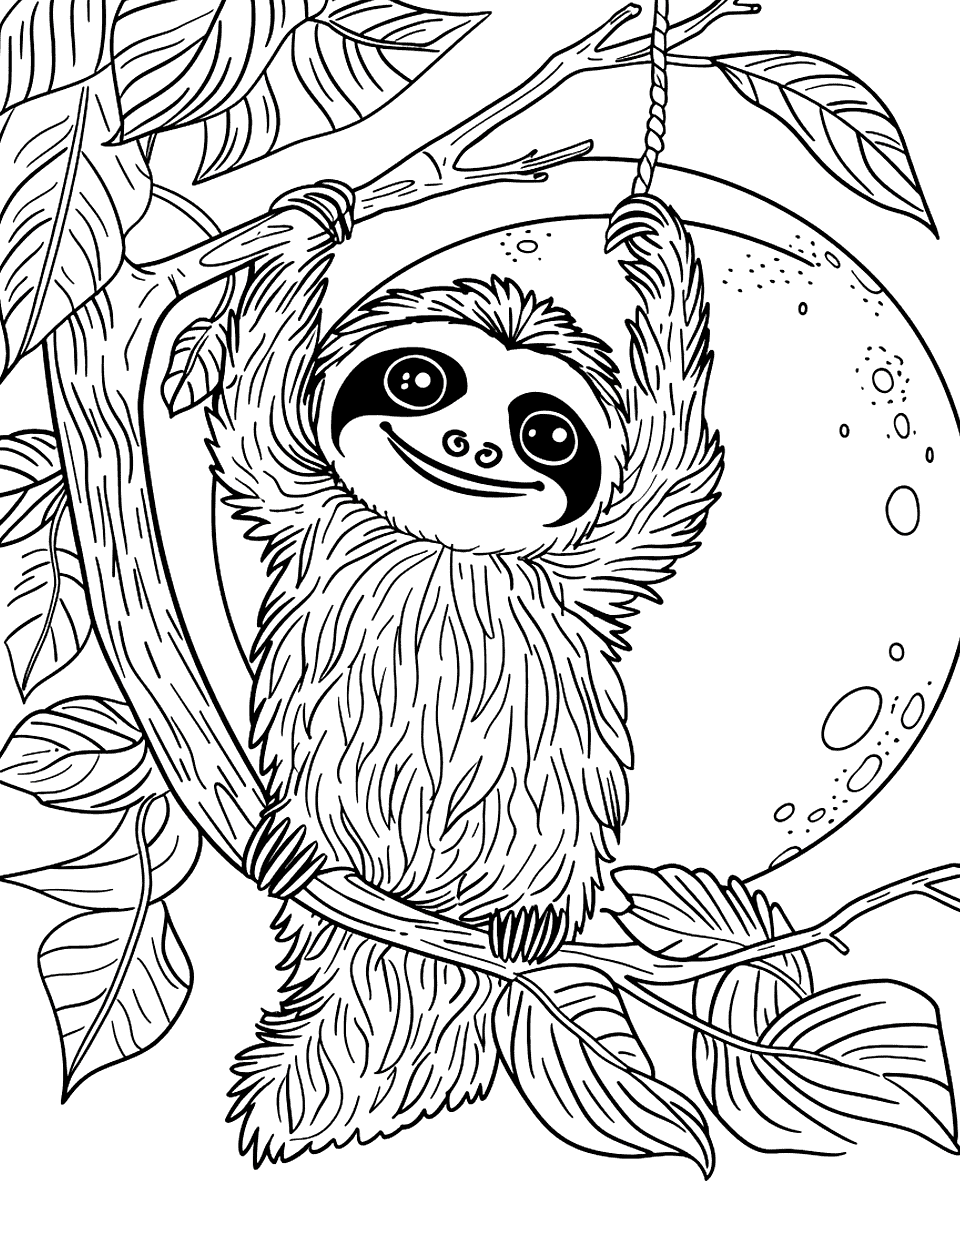 Sloth and the Full Moon Coloring Page - A sloth hanging from a branch with the full moon large and prominent in the background.